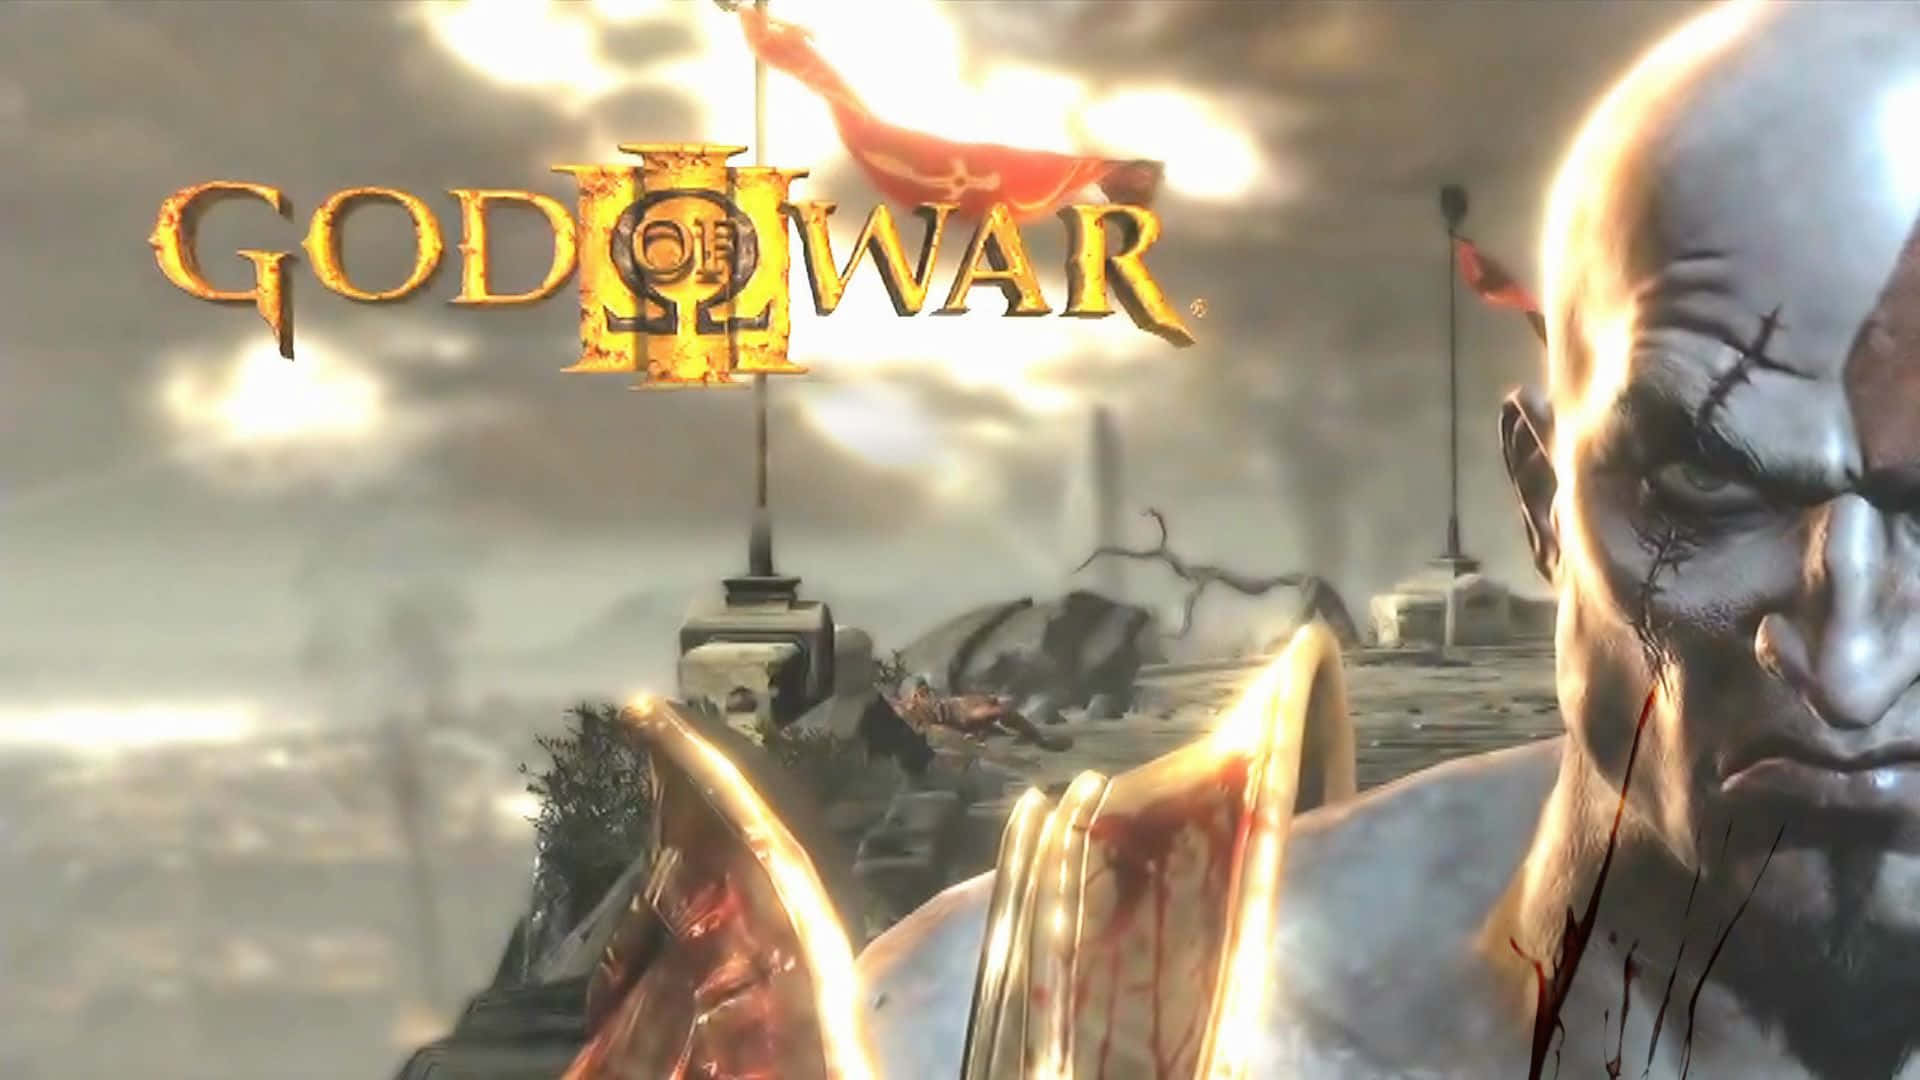 Battle your way to justice in God of War 3 Wallpaper